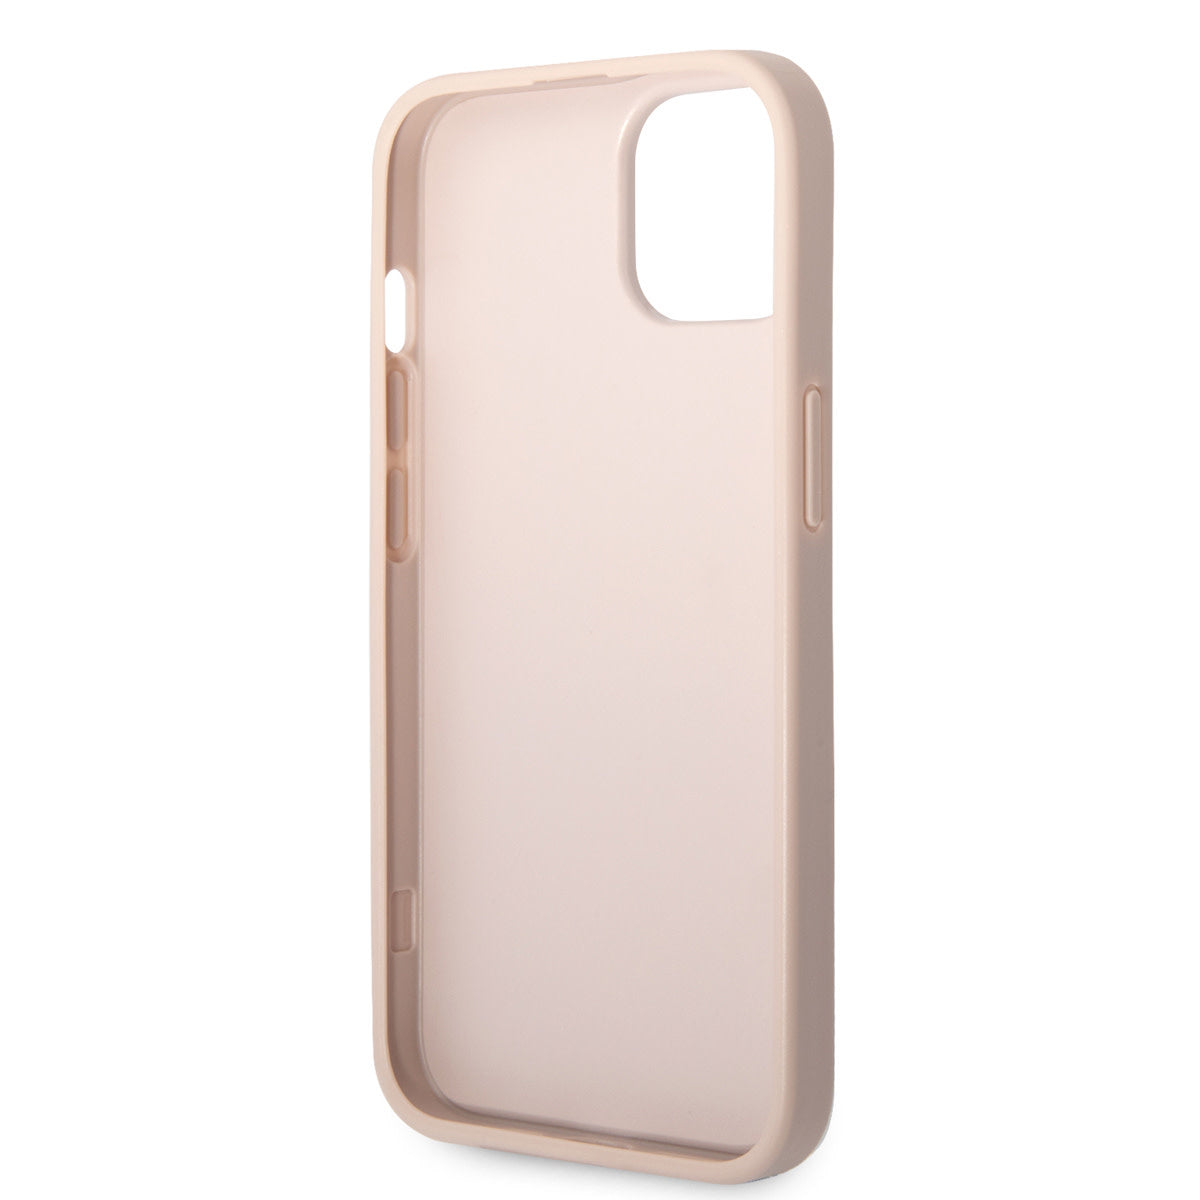 Guess iPhone 14 Plus Backcover - Gold 4G Logo - Roze